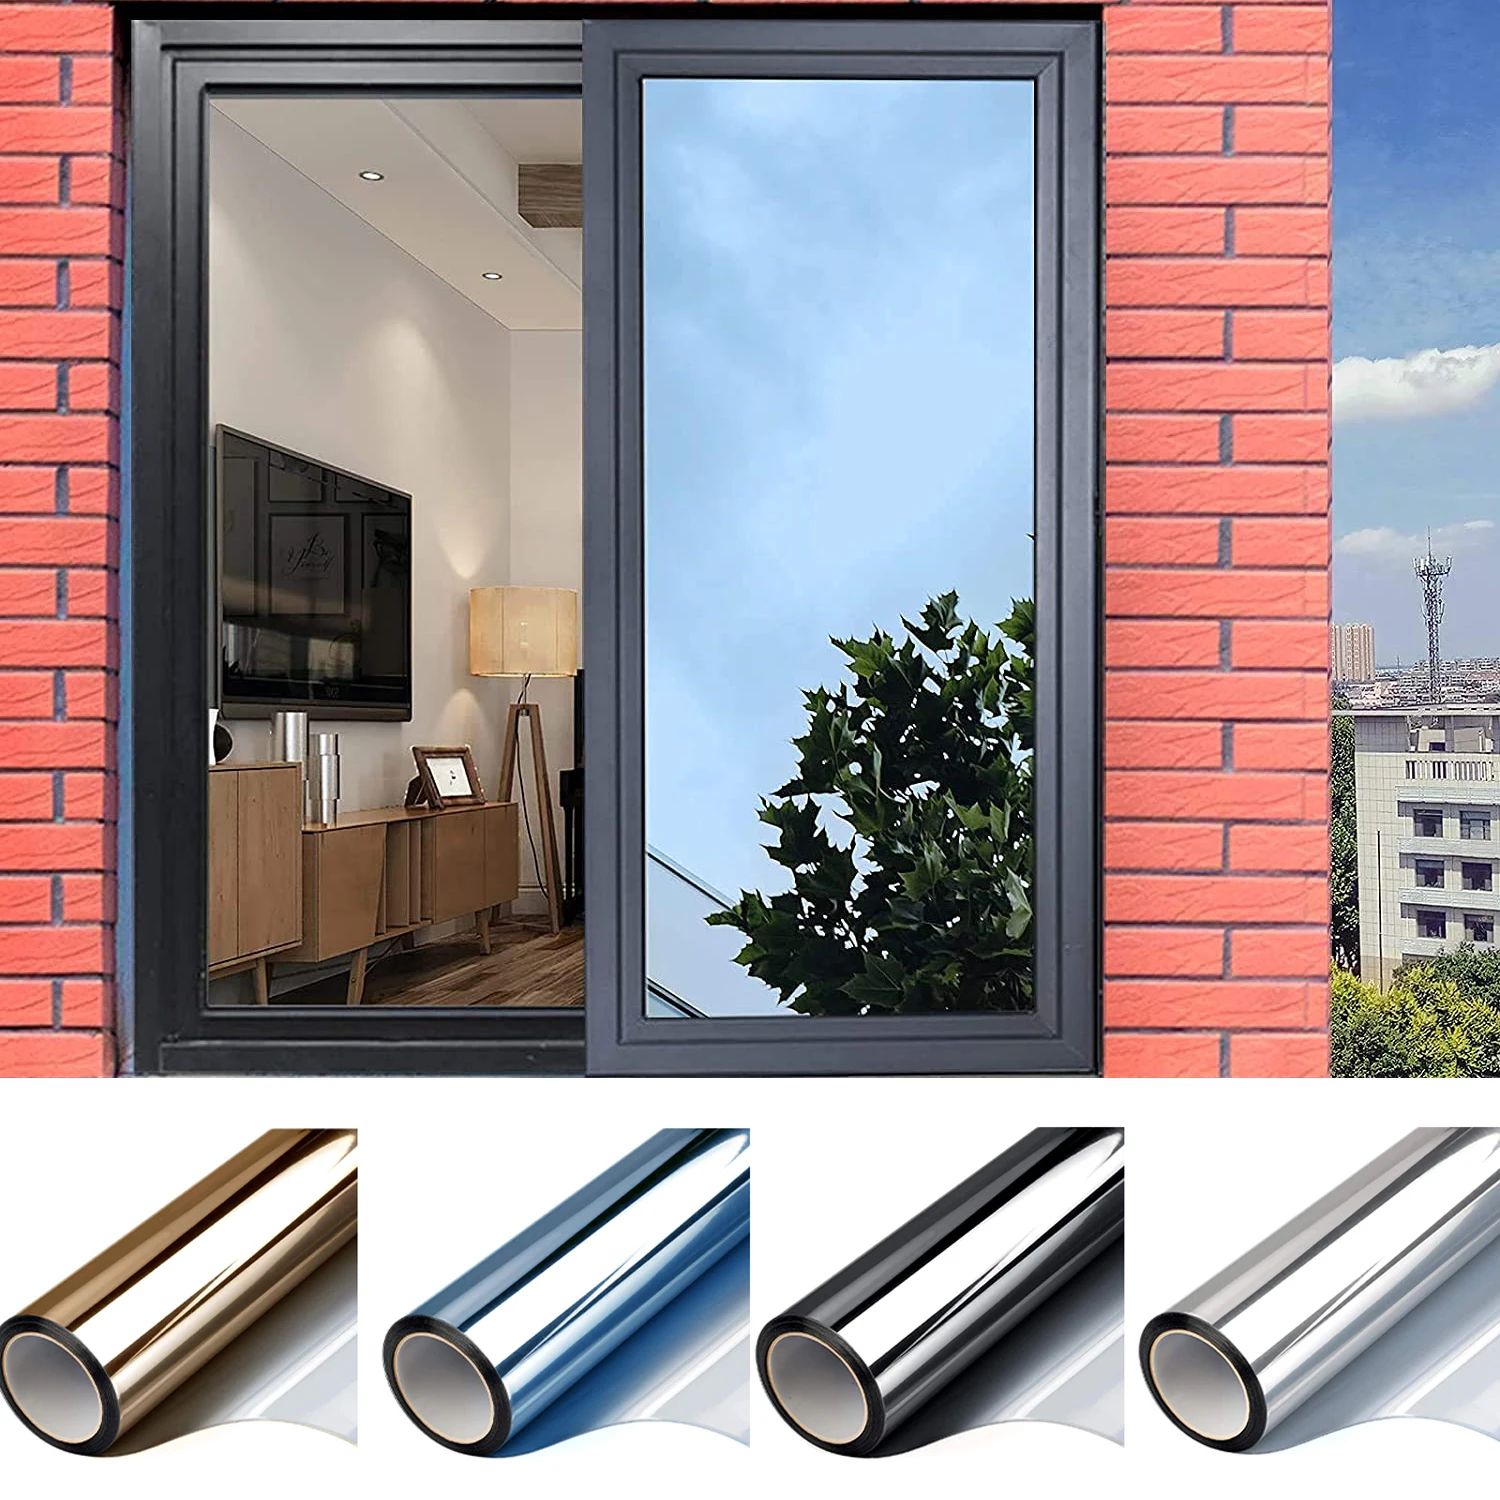 Details about   2m Reflective One Way Window Film Sunscreen Privacy Glass Solar Tint New 